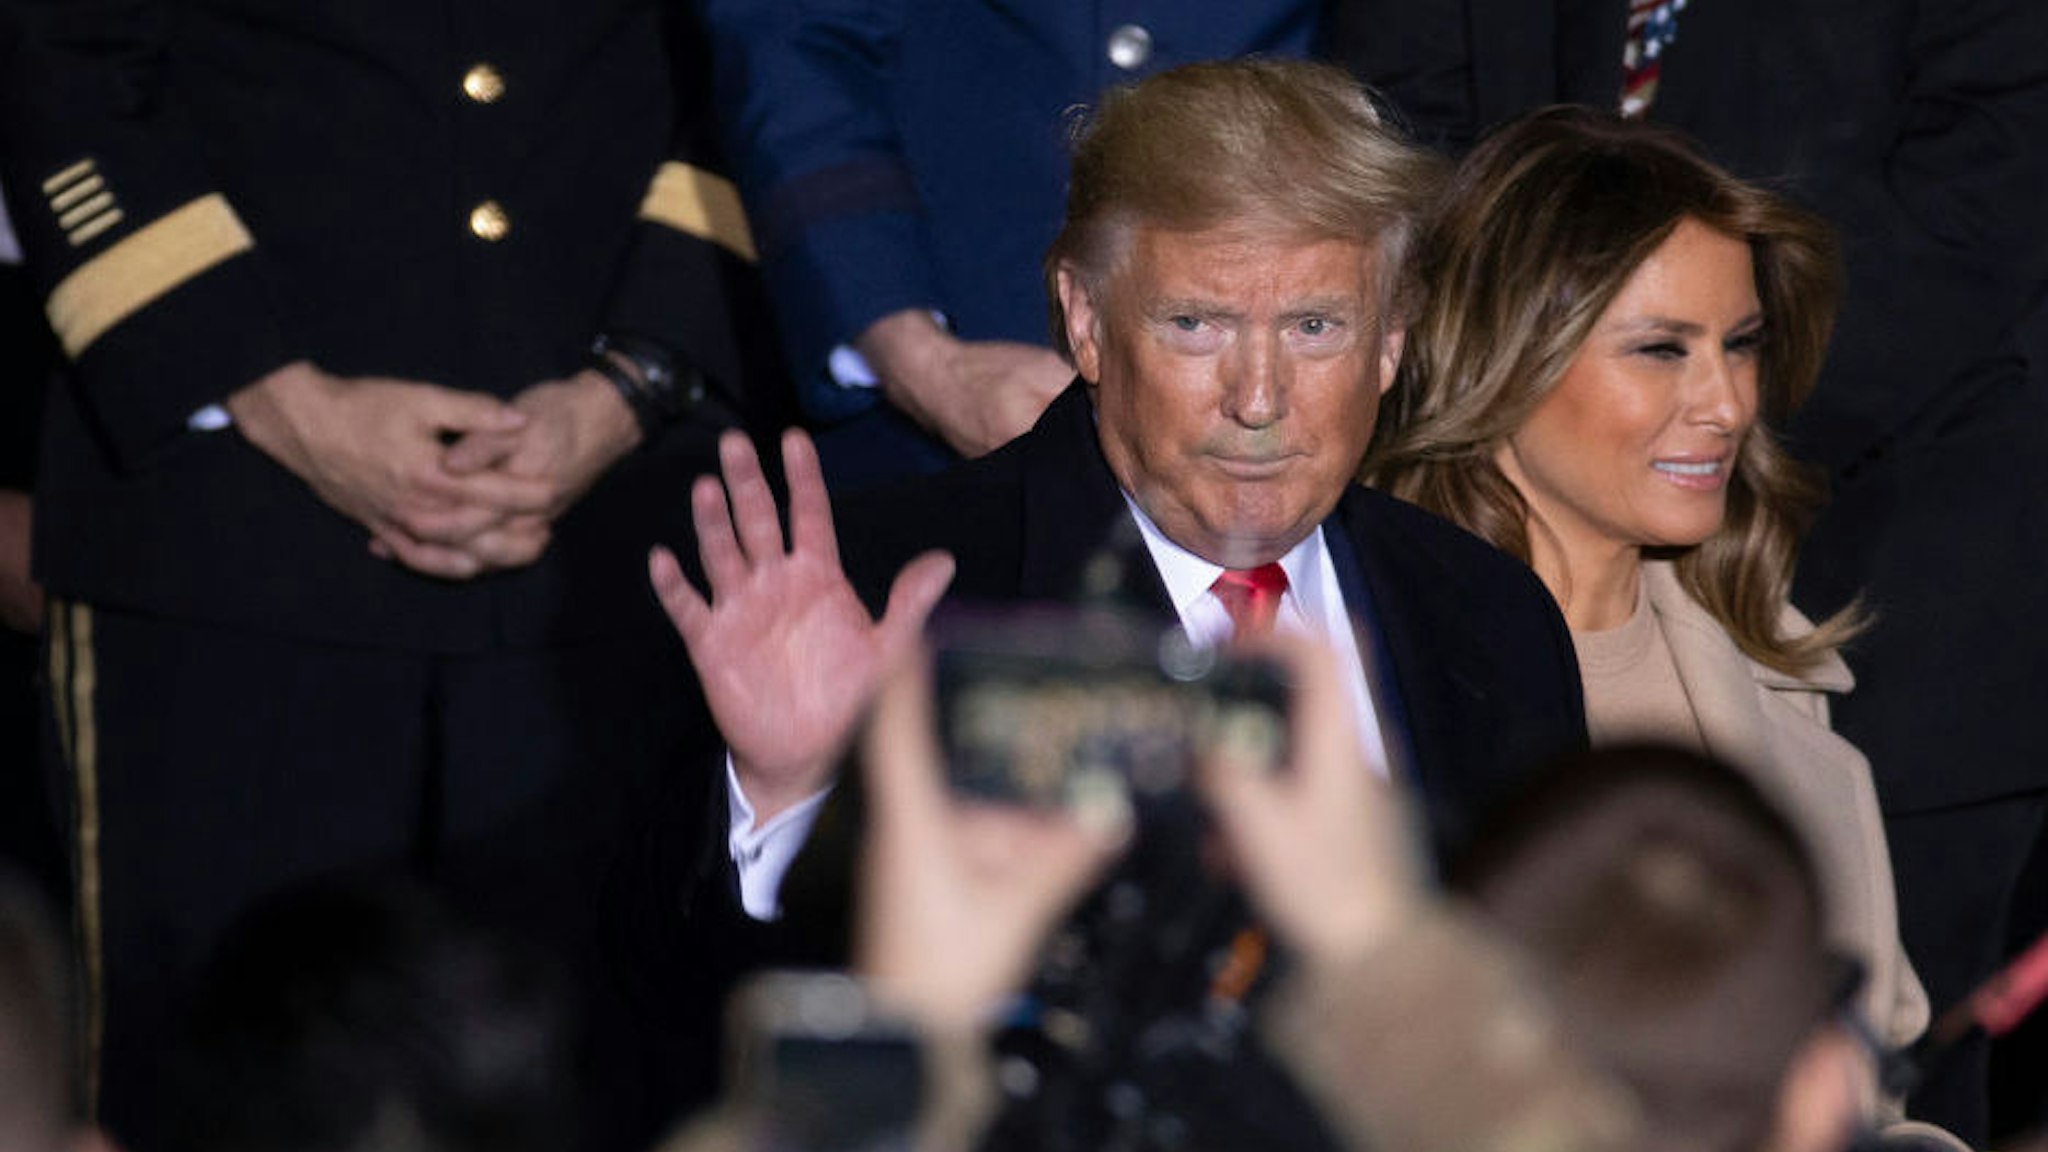 US President Donald Trump and First Lady Melania Trump greet troops at the signing ceremony for S.1709, The National Defense Authorization Act for Fiscal Year 2020 on December 20, 2019 in Joint Base Andrews, Maryland. President Trump is headed to Florida for the Holidays after a historic impeachment vote on the house floor this week. (Photo by Tasos Katopodis/Getty Images)